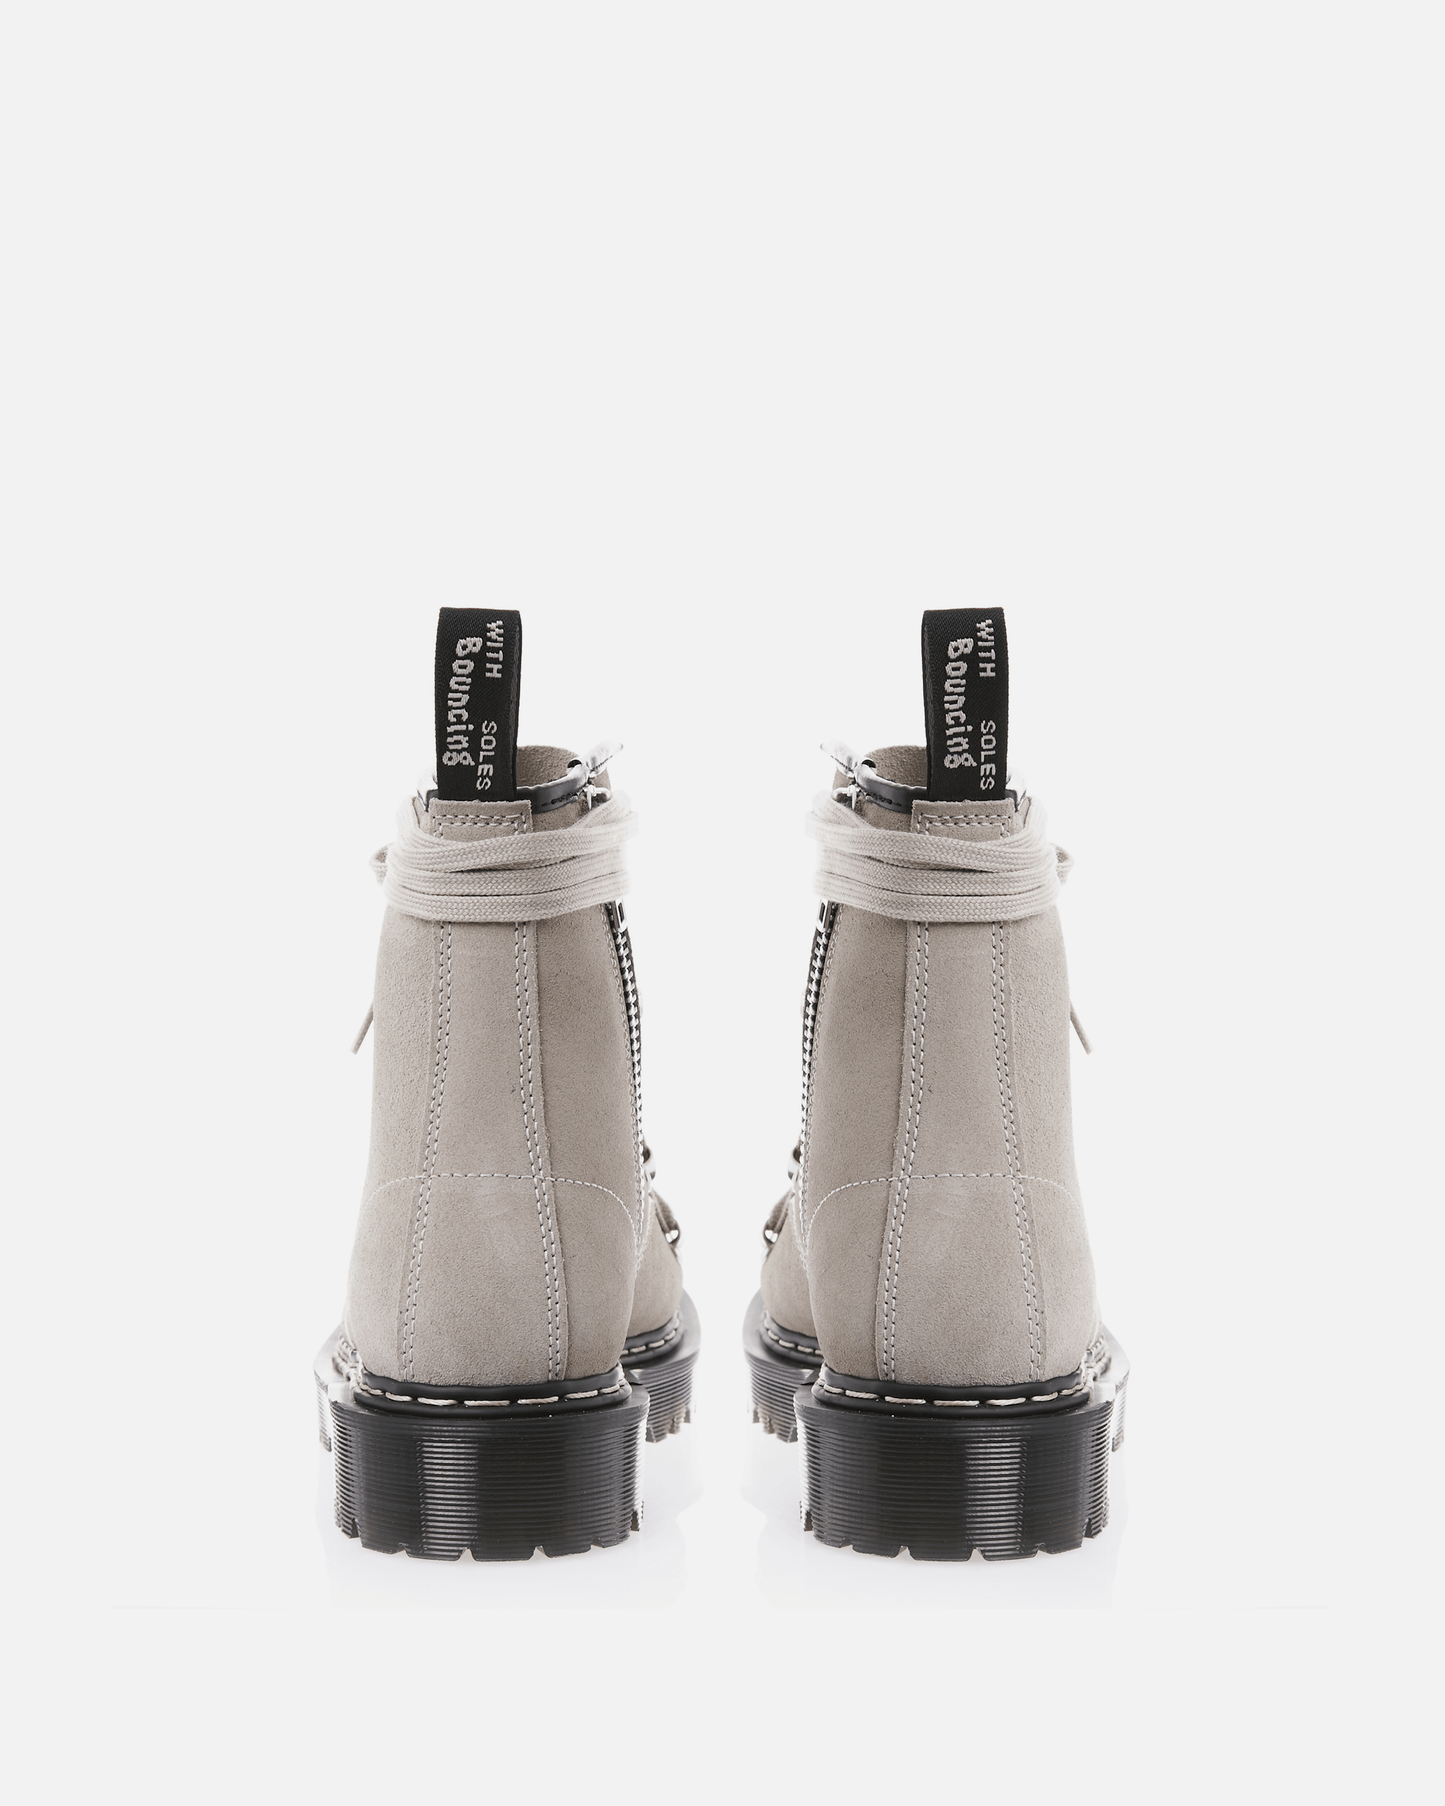 Rick Owens Releases Dr. Martens Bex Sole Boots in Pearl